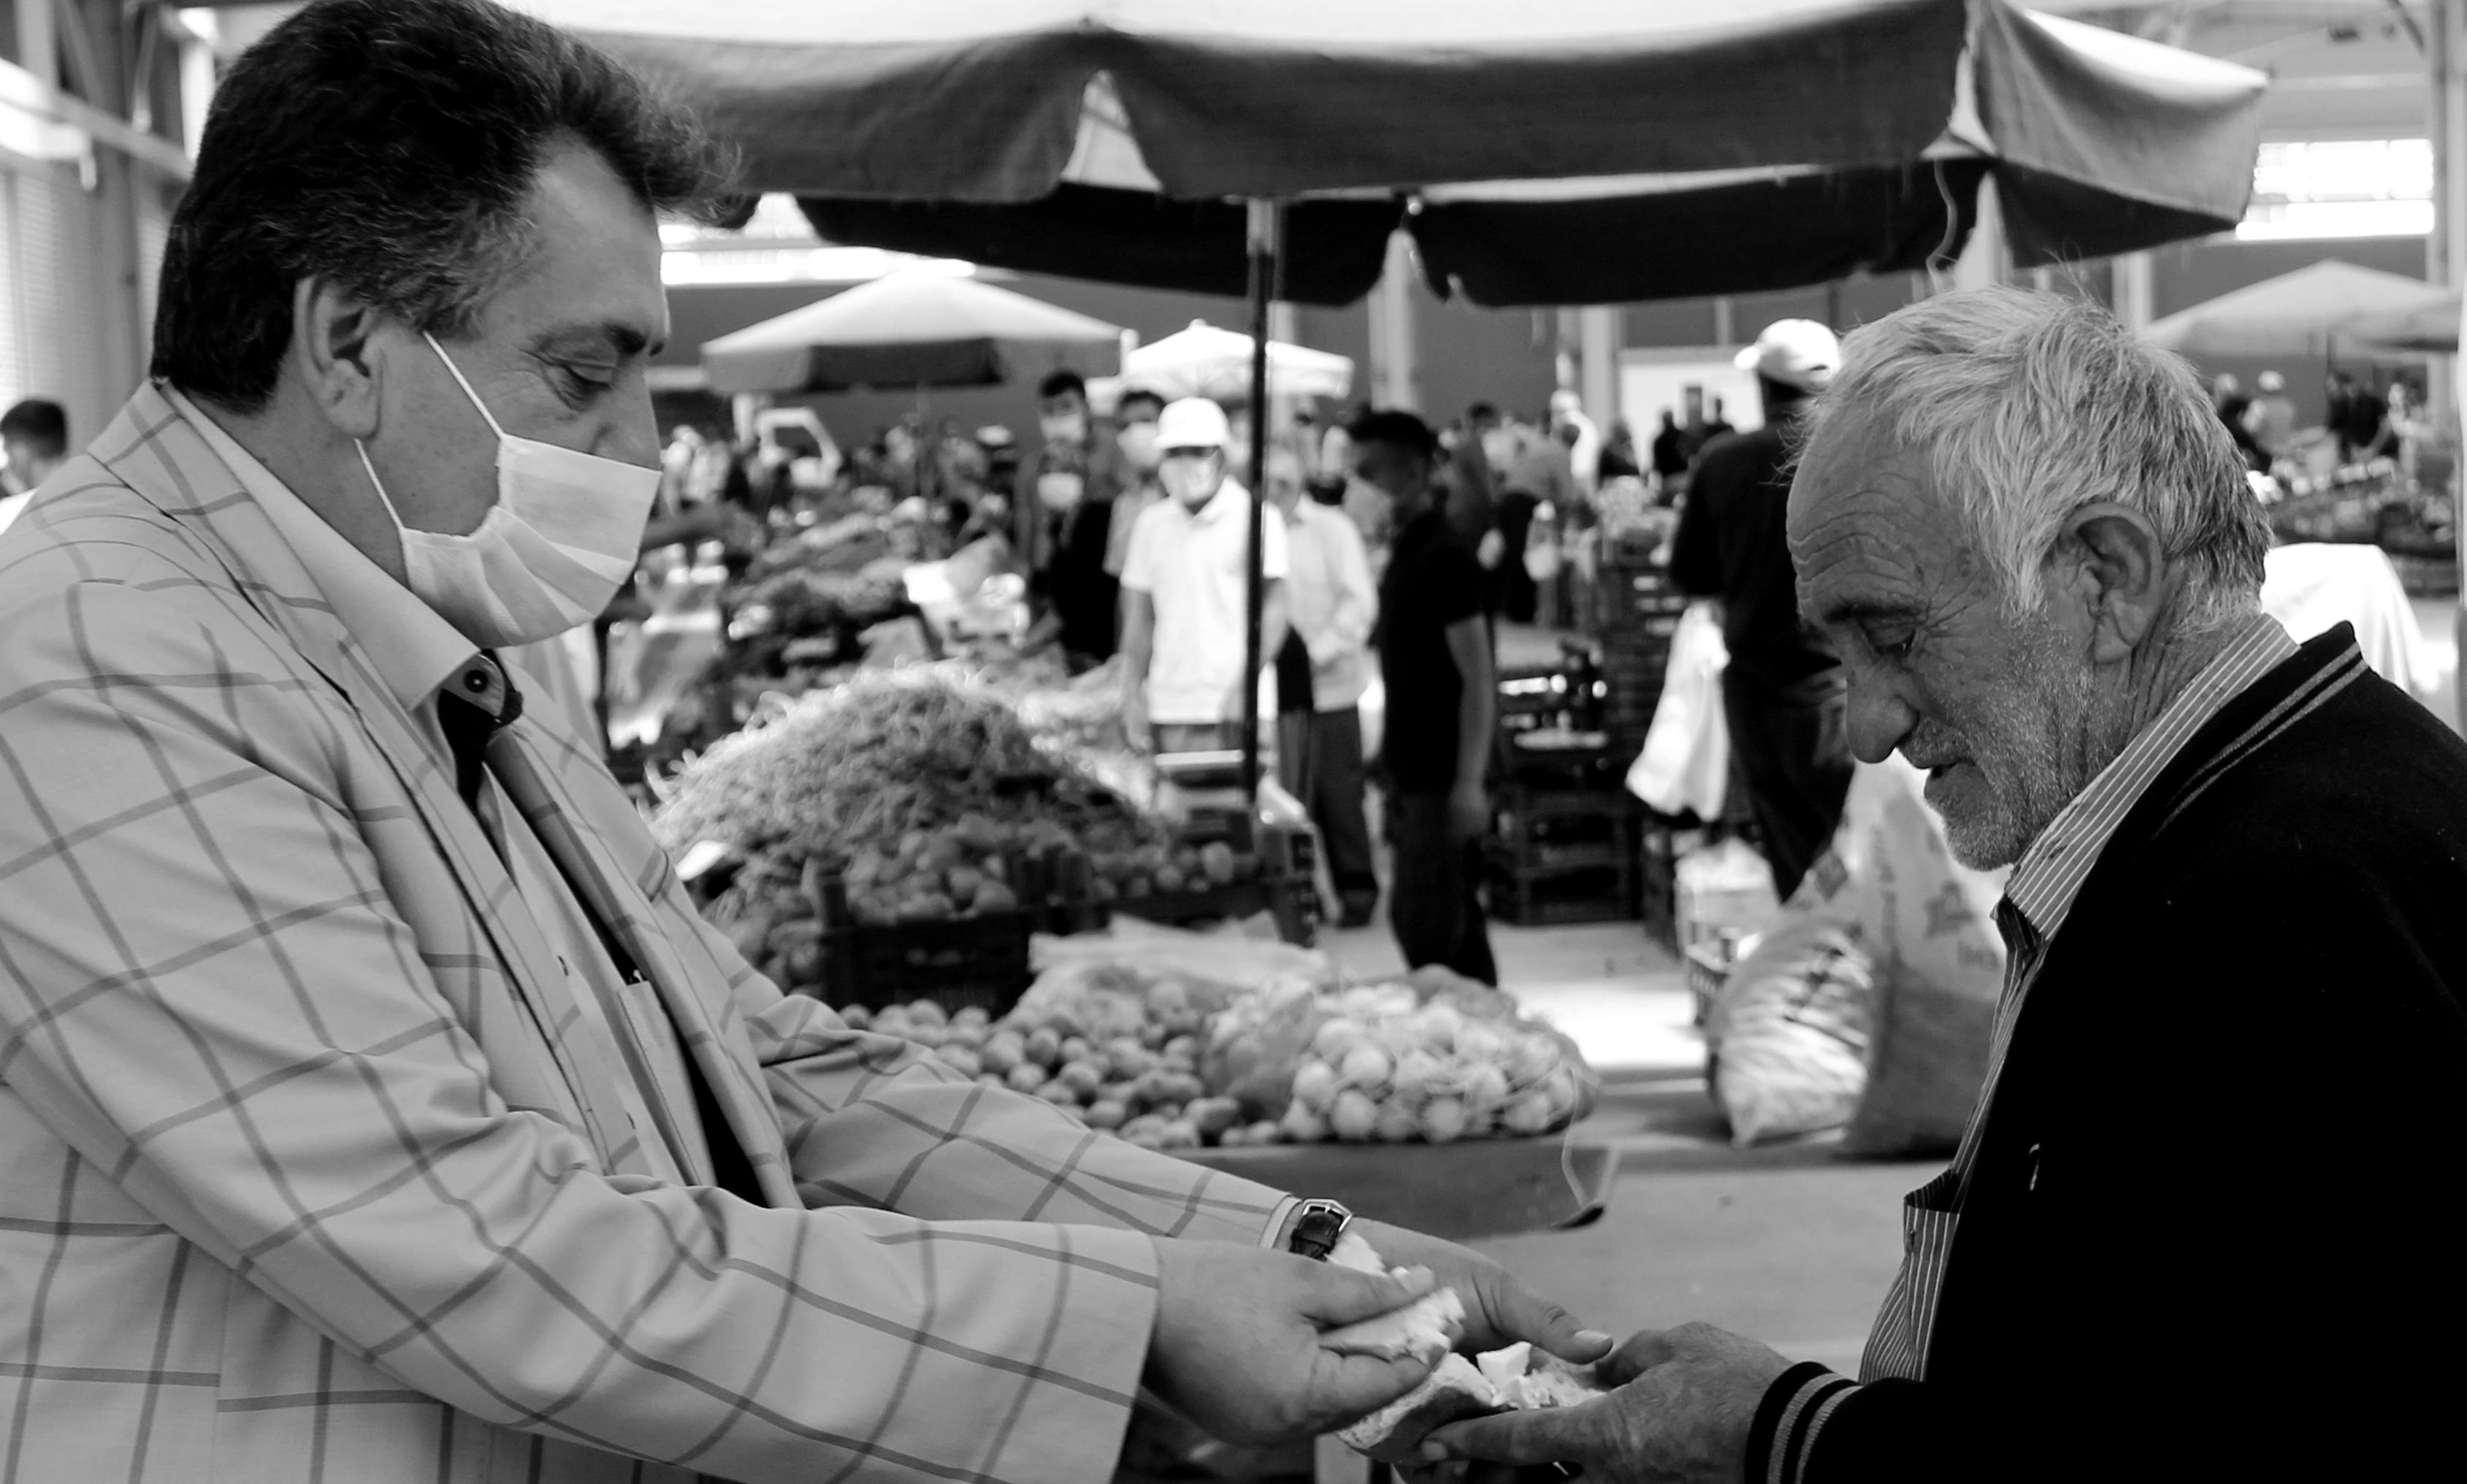 Man in mask and older man exchange food and money